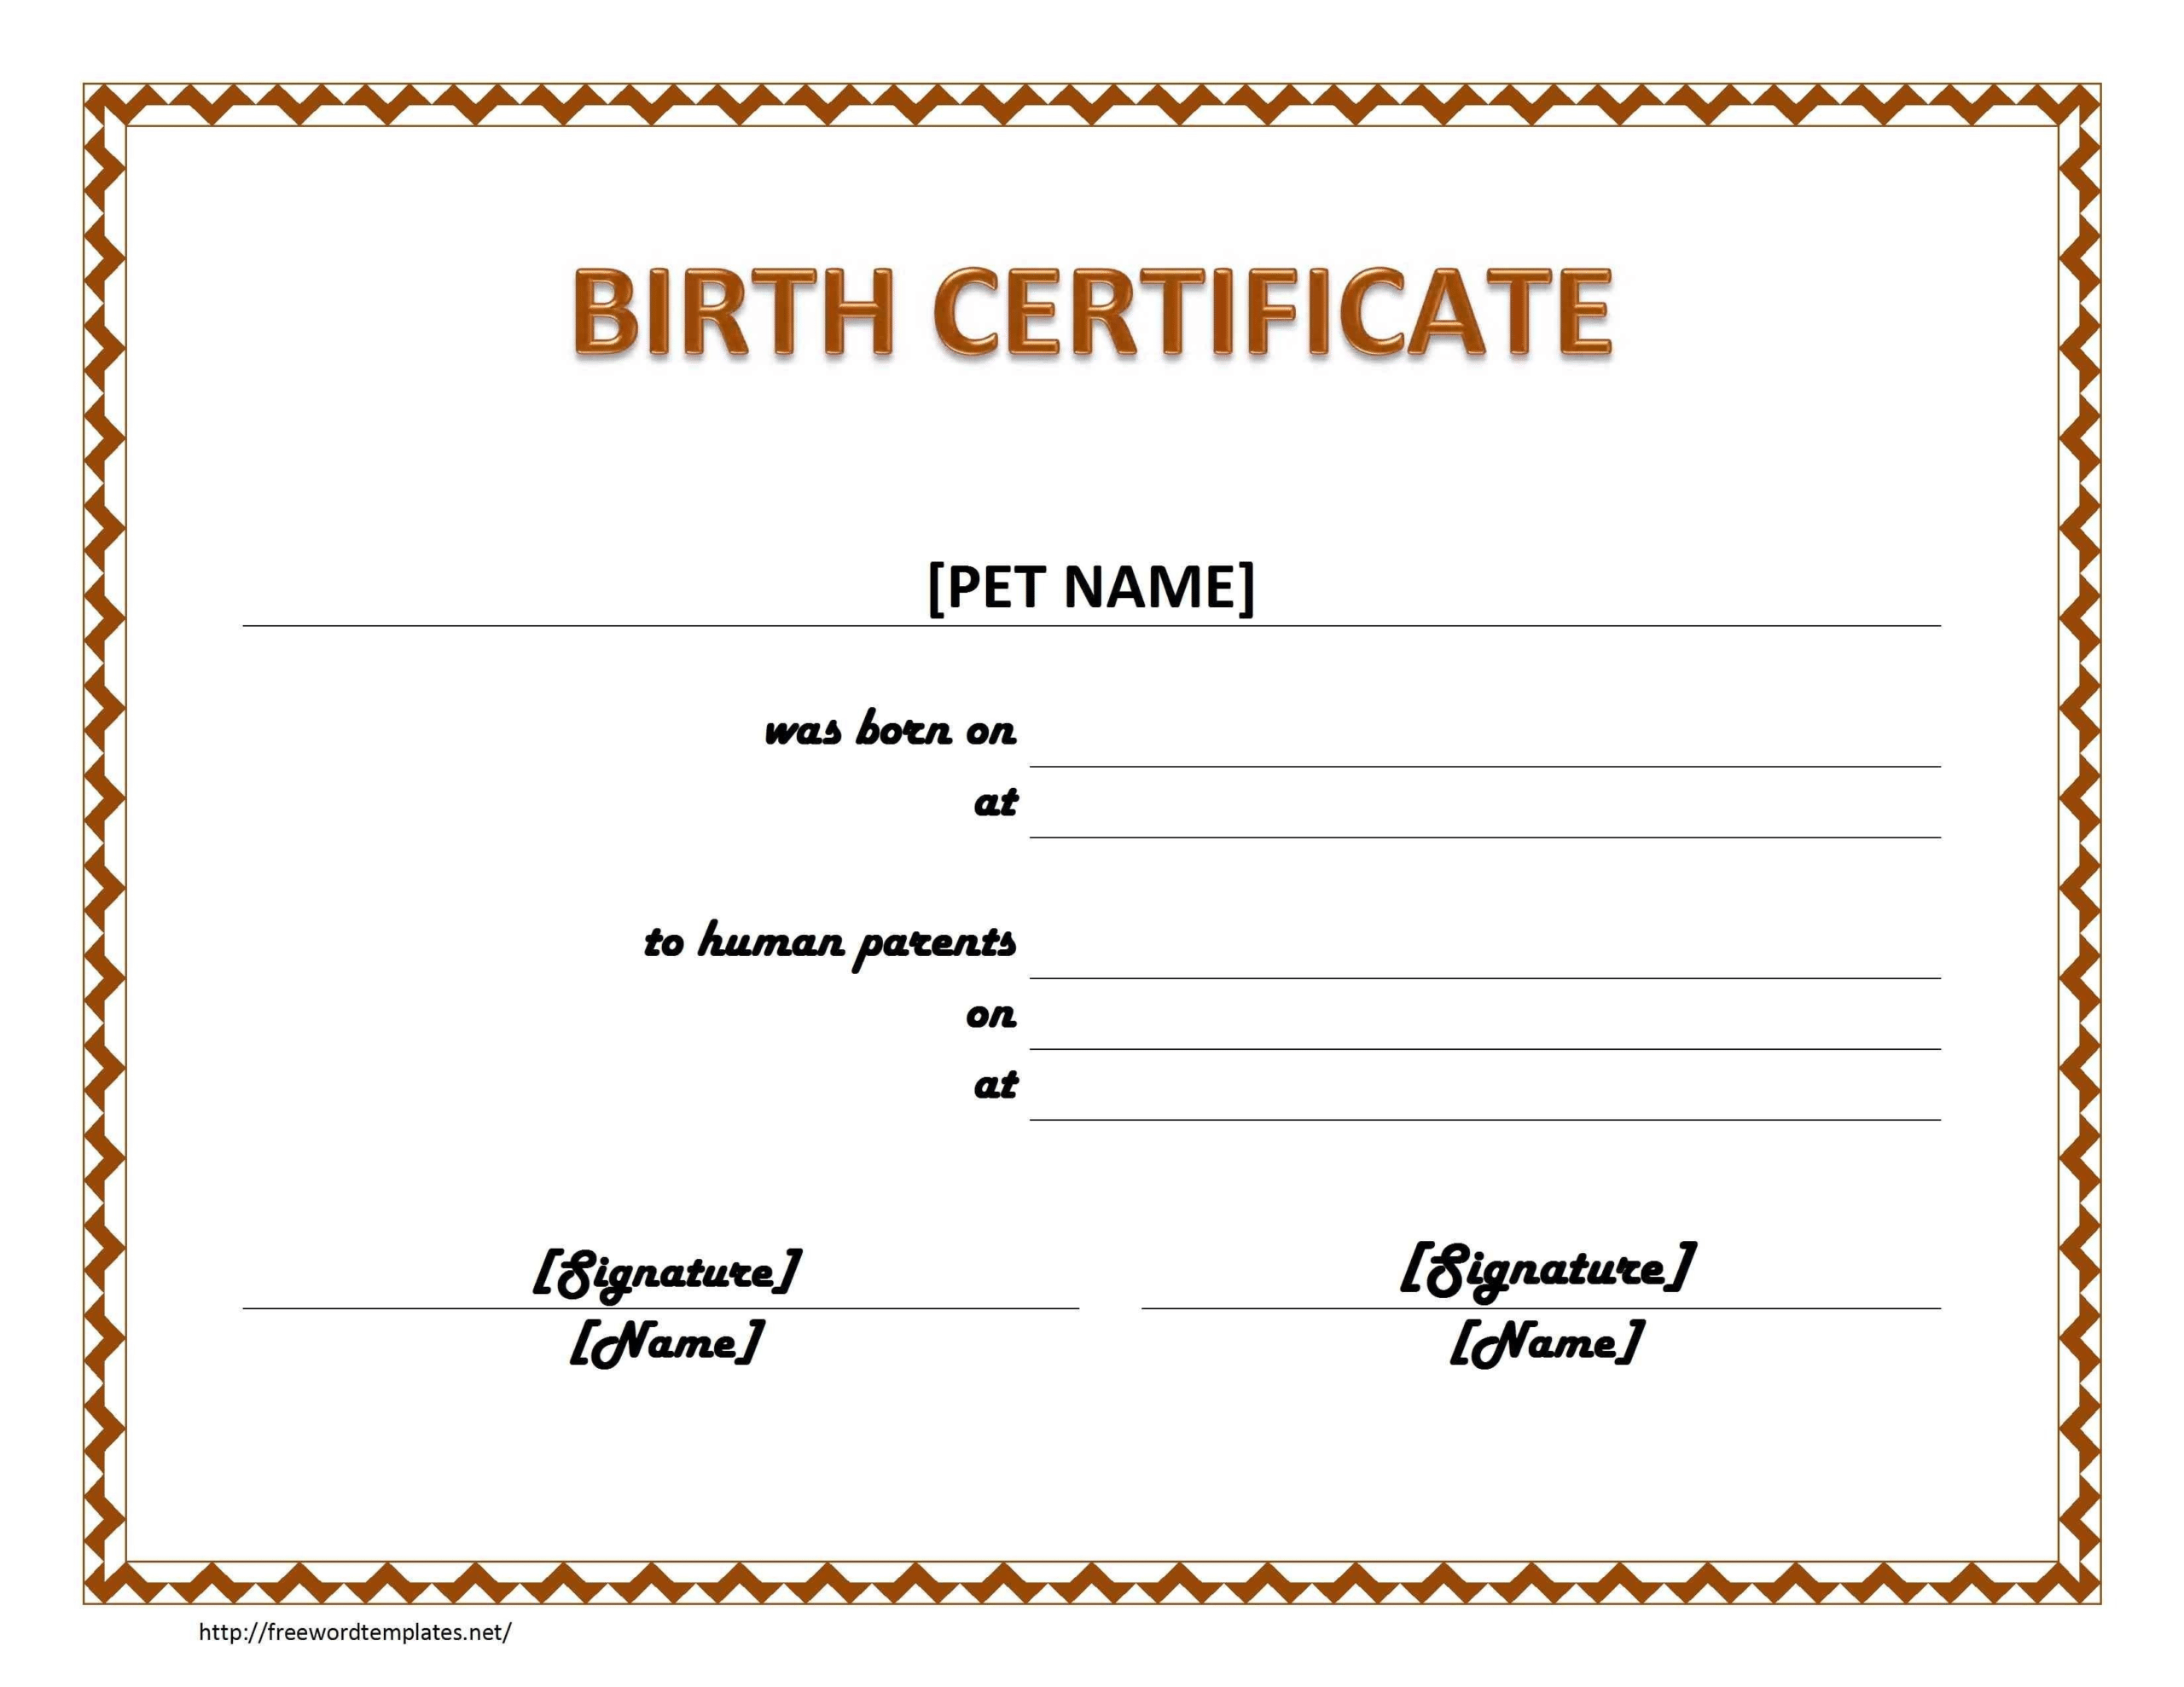 Blank Birth Certificate Template For Elements Novelty Images Within Novelty Birth Certificate Template